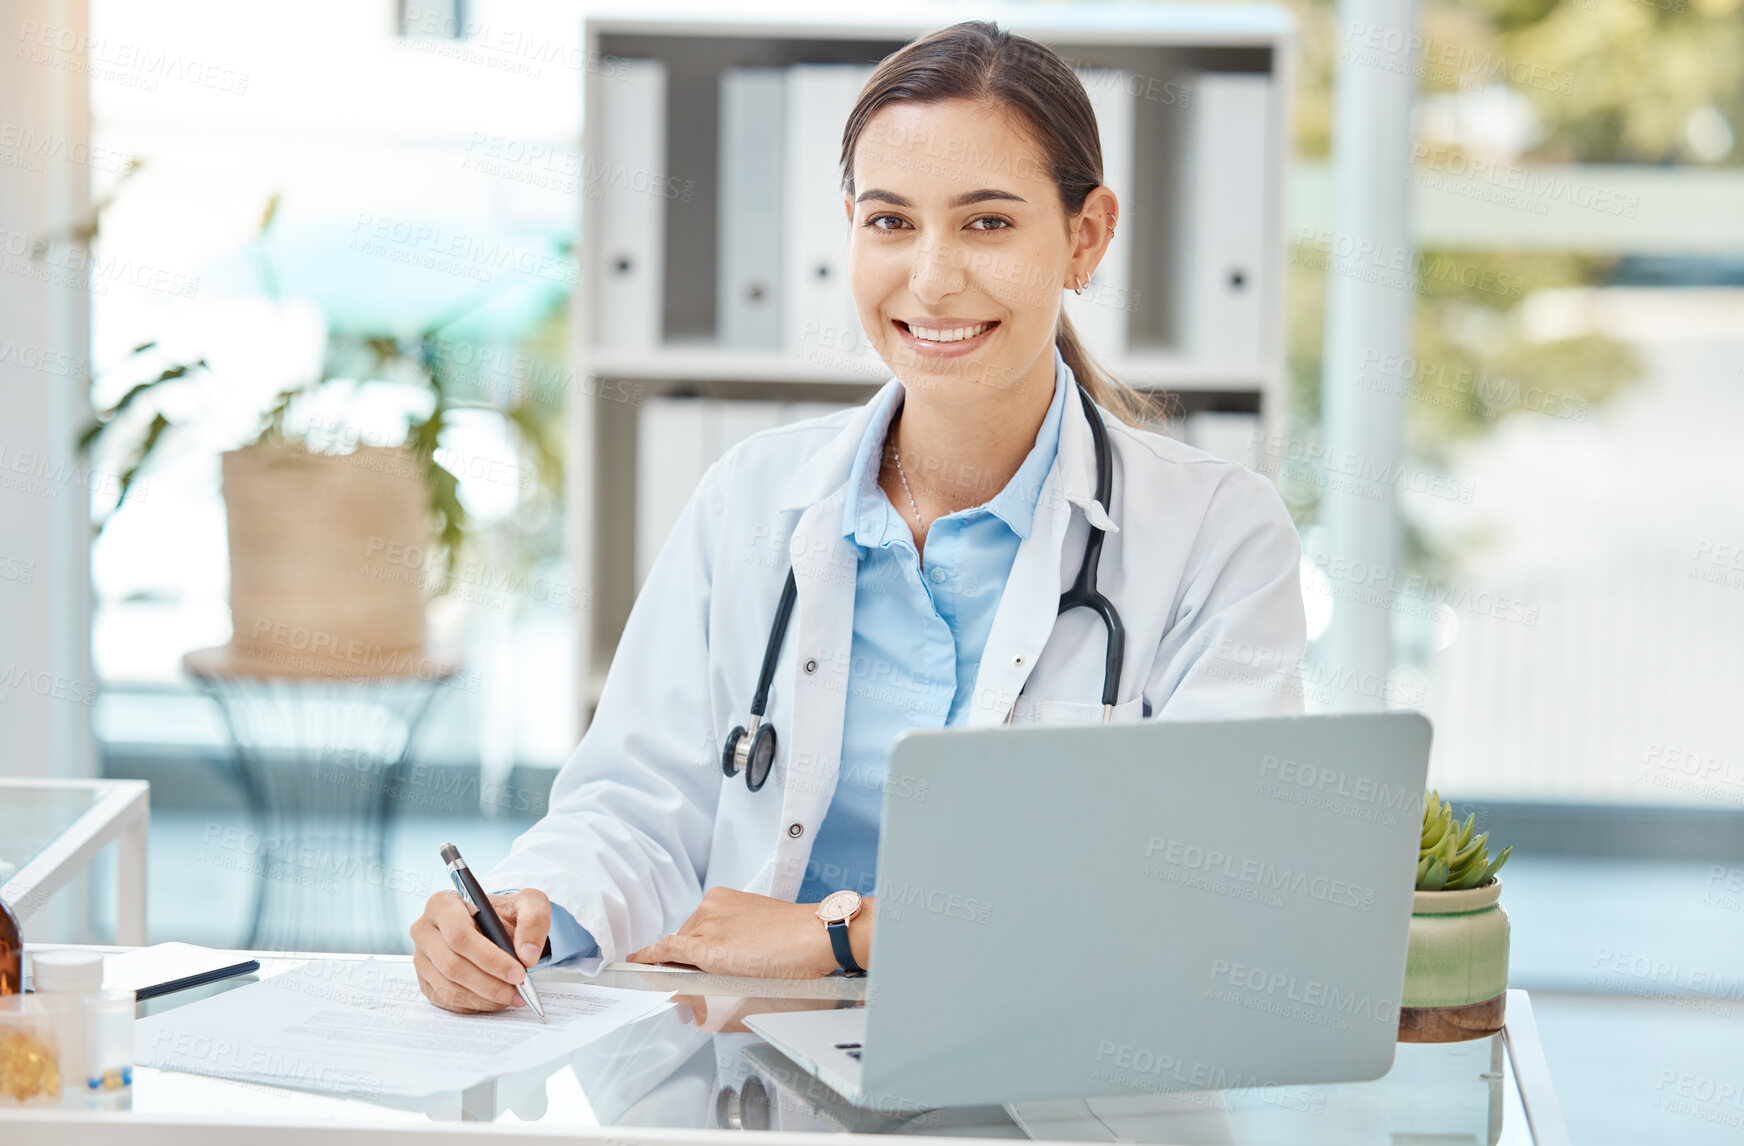 Buy stock photo Healthcare, medicine and a doctor writing on insurance document or patient file. Happy woman working in medical field, at desk with laptop consulting online and filling in a script at hospital office